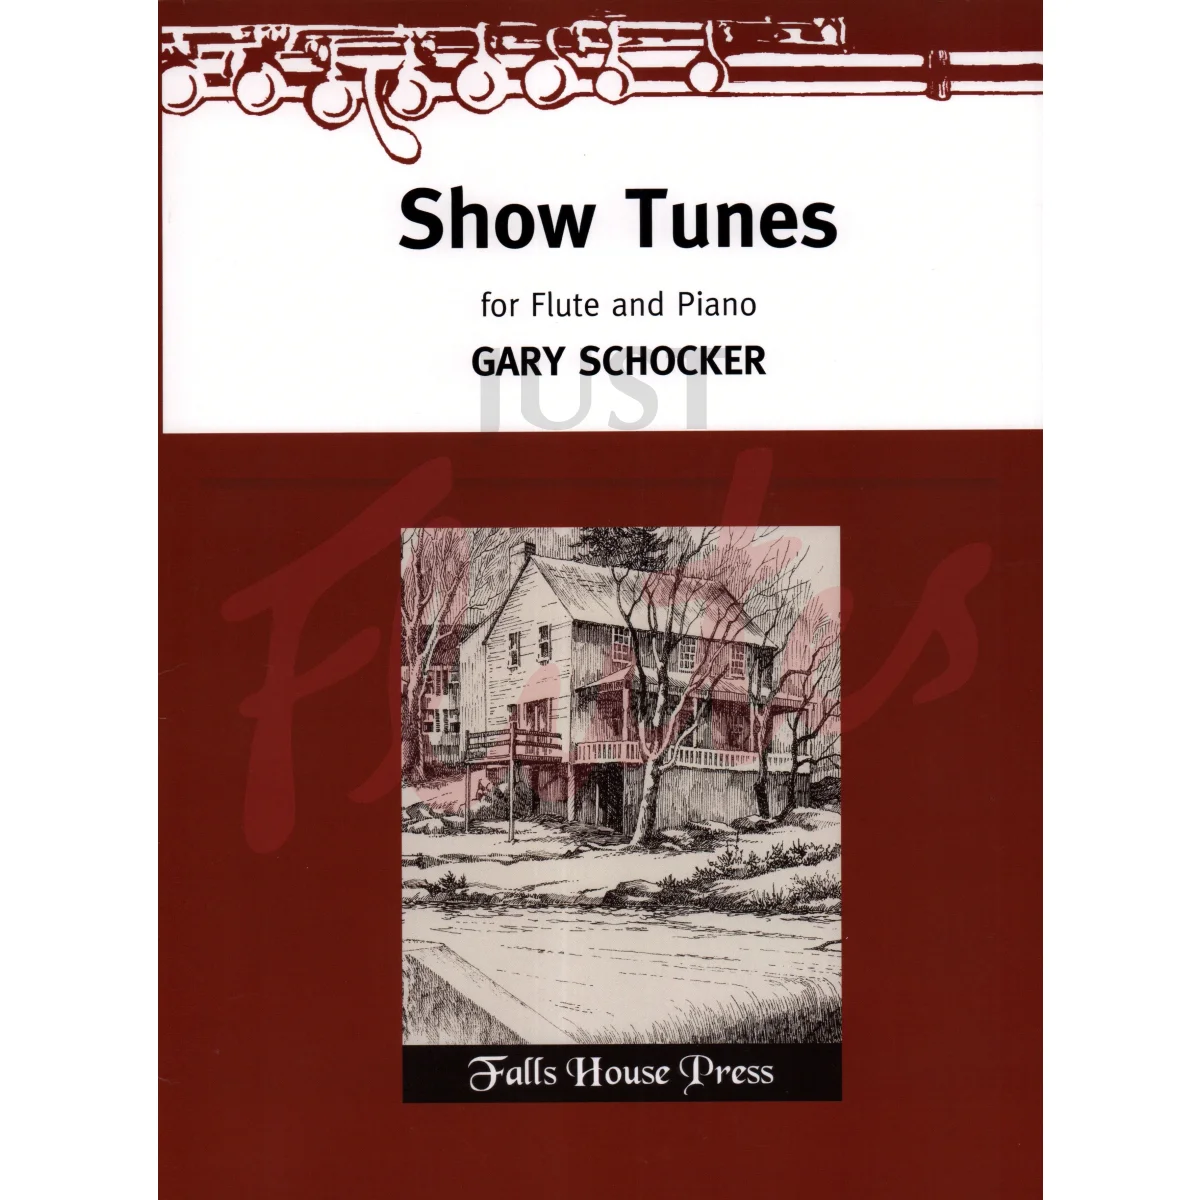 Show Tunes for Flute and Piano